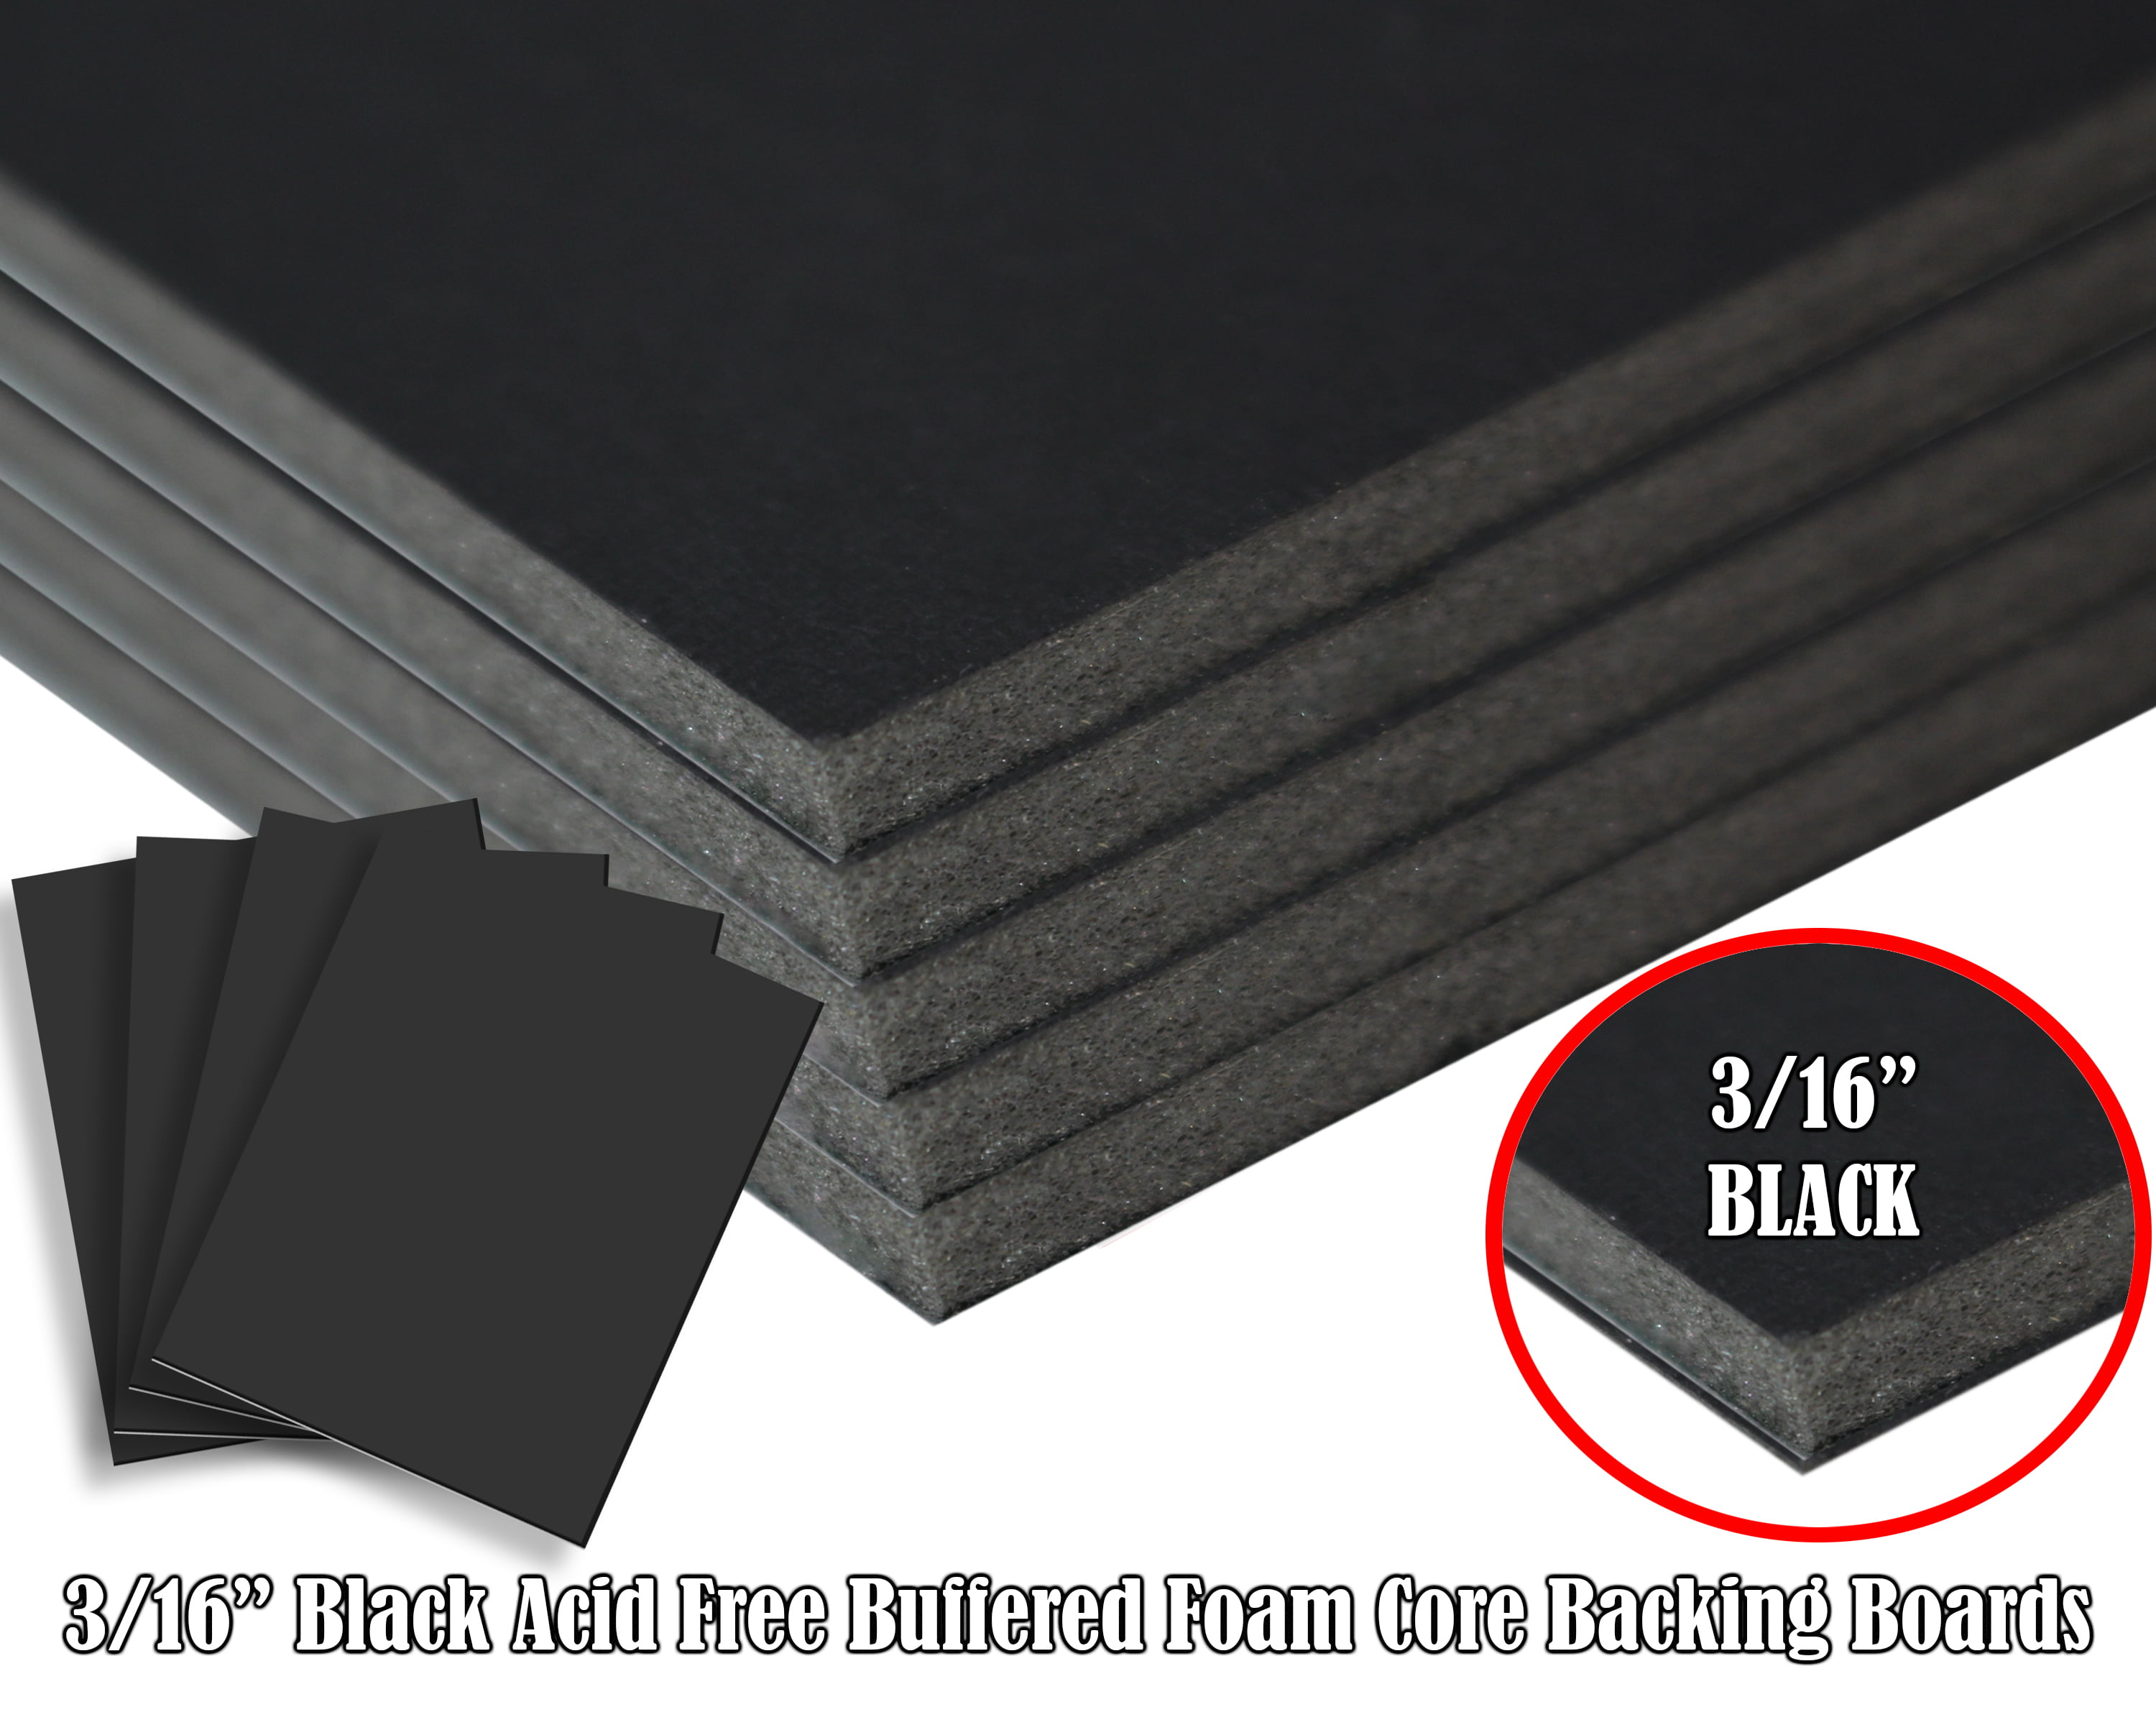 Foam Core Backing Board 3/16 Black 12x24- 50 Pack. Many Sizes Available.  Acid Free Buffered Craft Poster Board for Signs, Presentations, School,  Office and Art Projects 